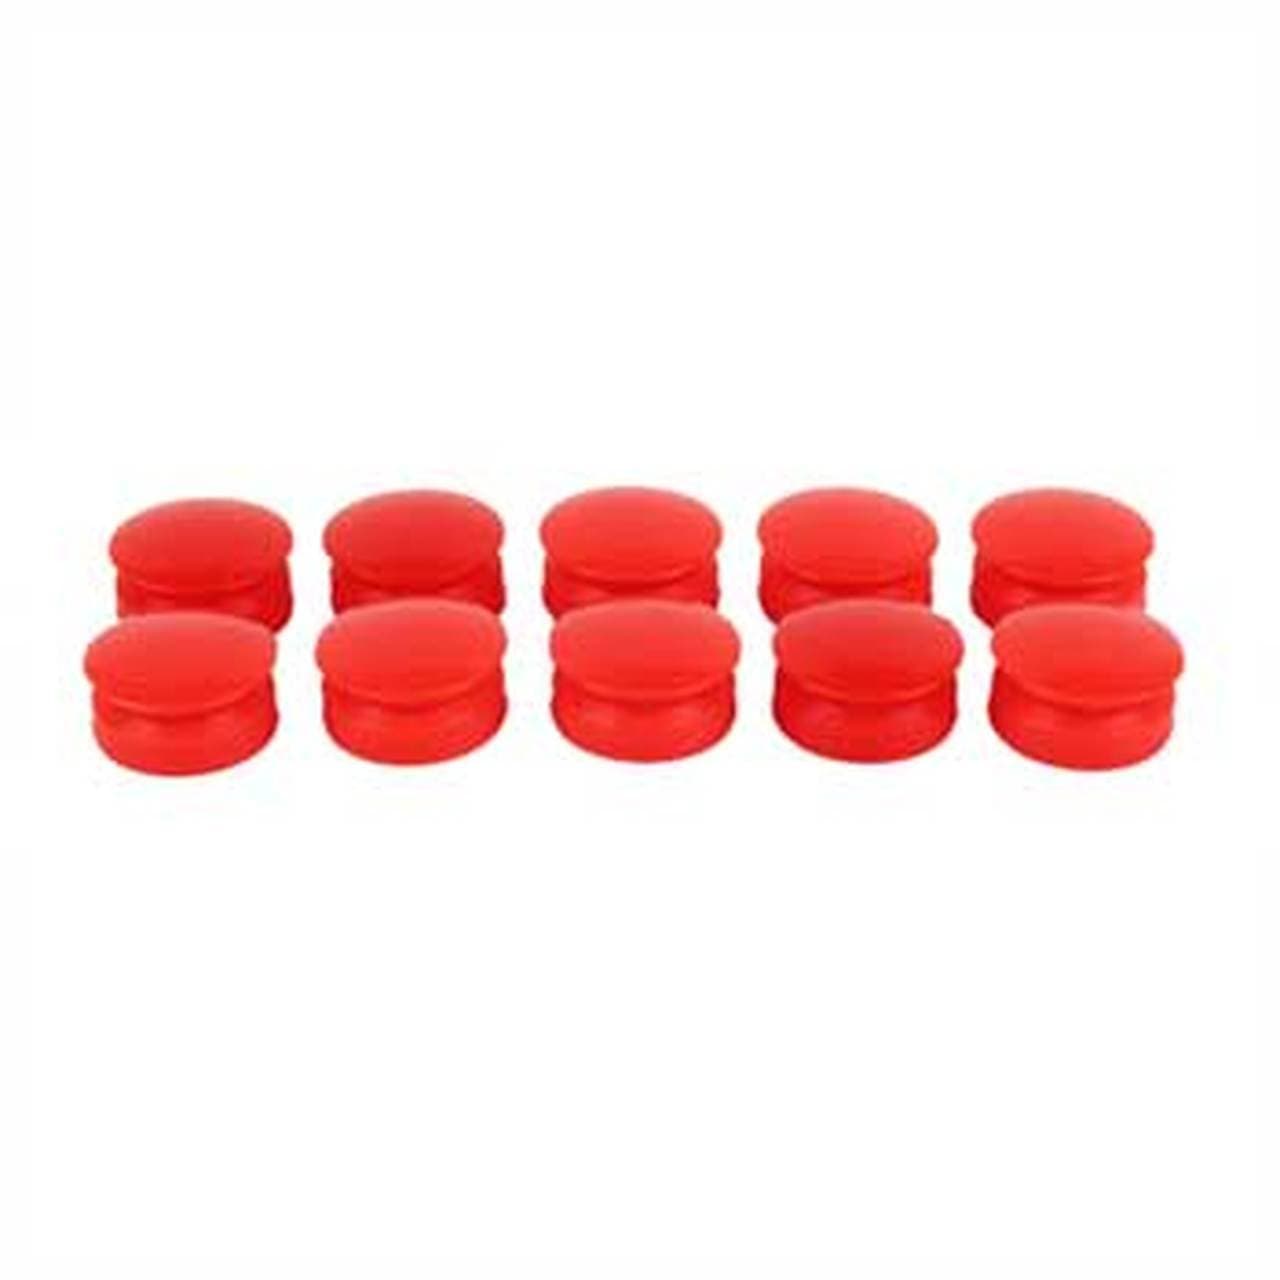 M203 Grenade Plug (10 piece) - Eminent Paintball And Airsoft